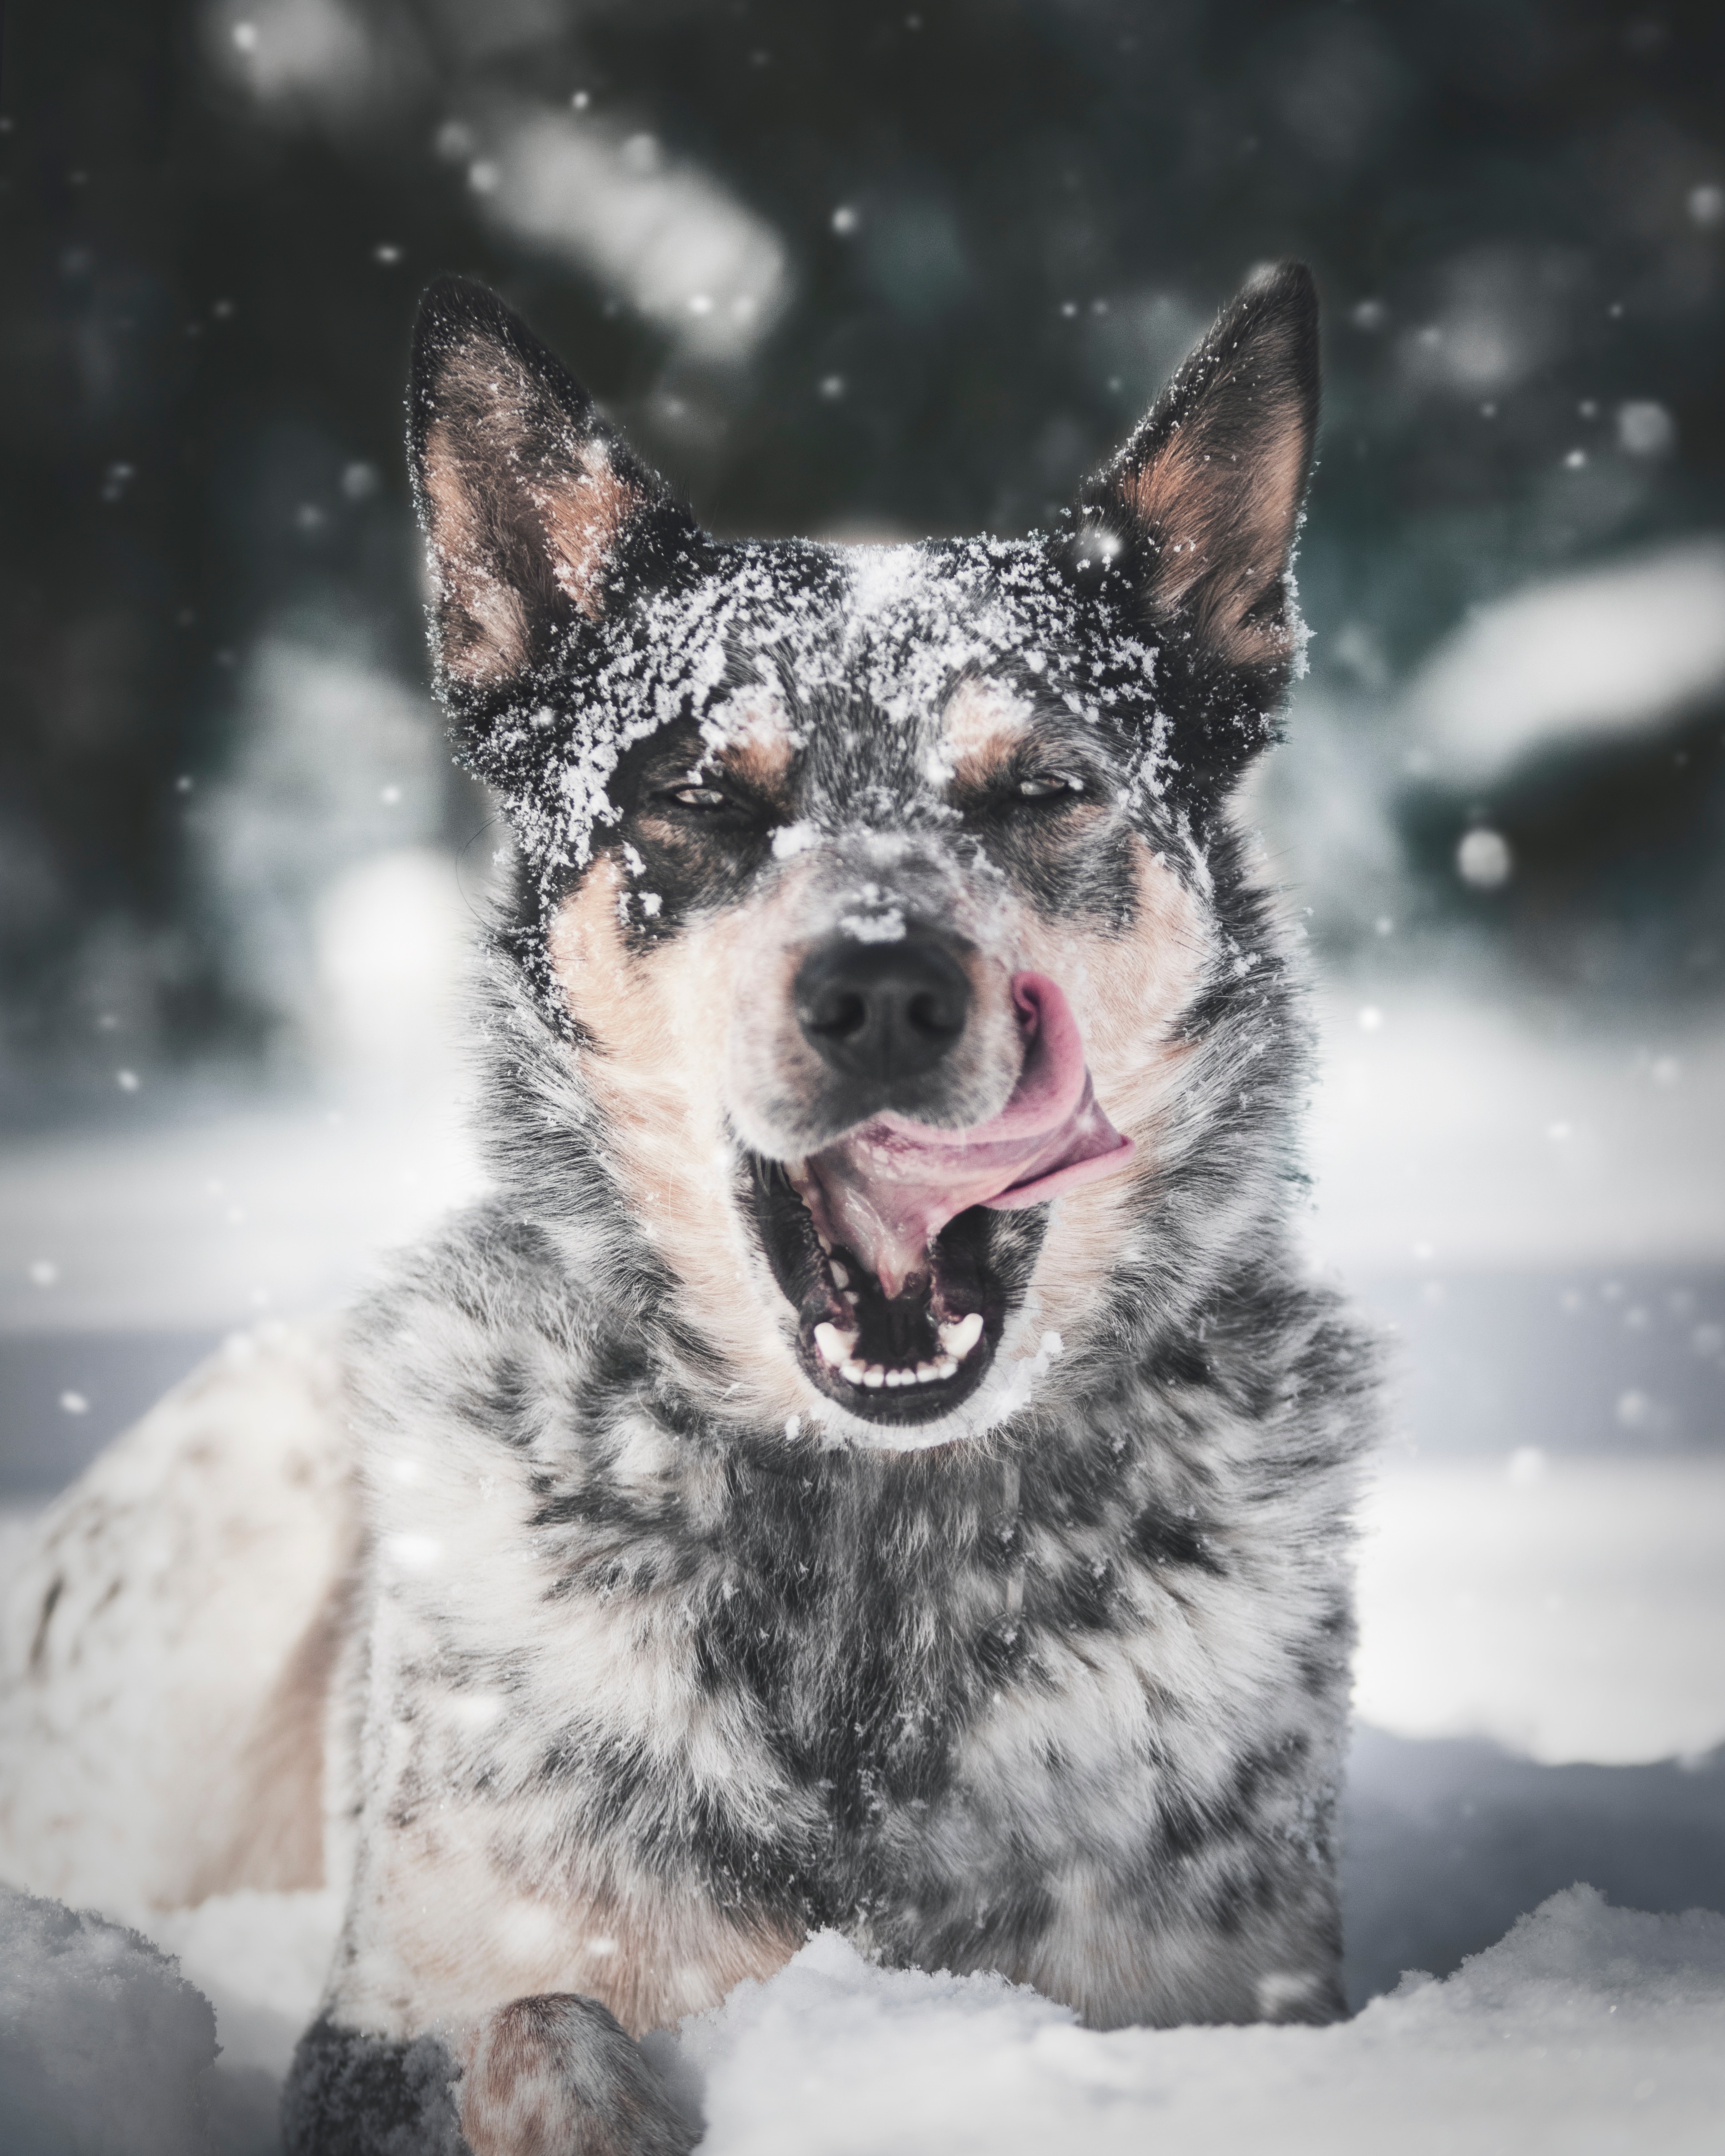 81010 download wallpaper animals, snow, dog, protruding tongue, tongue stuck out screensavers and pictures for free